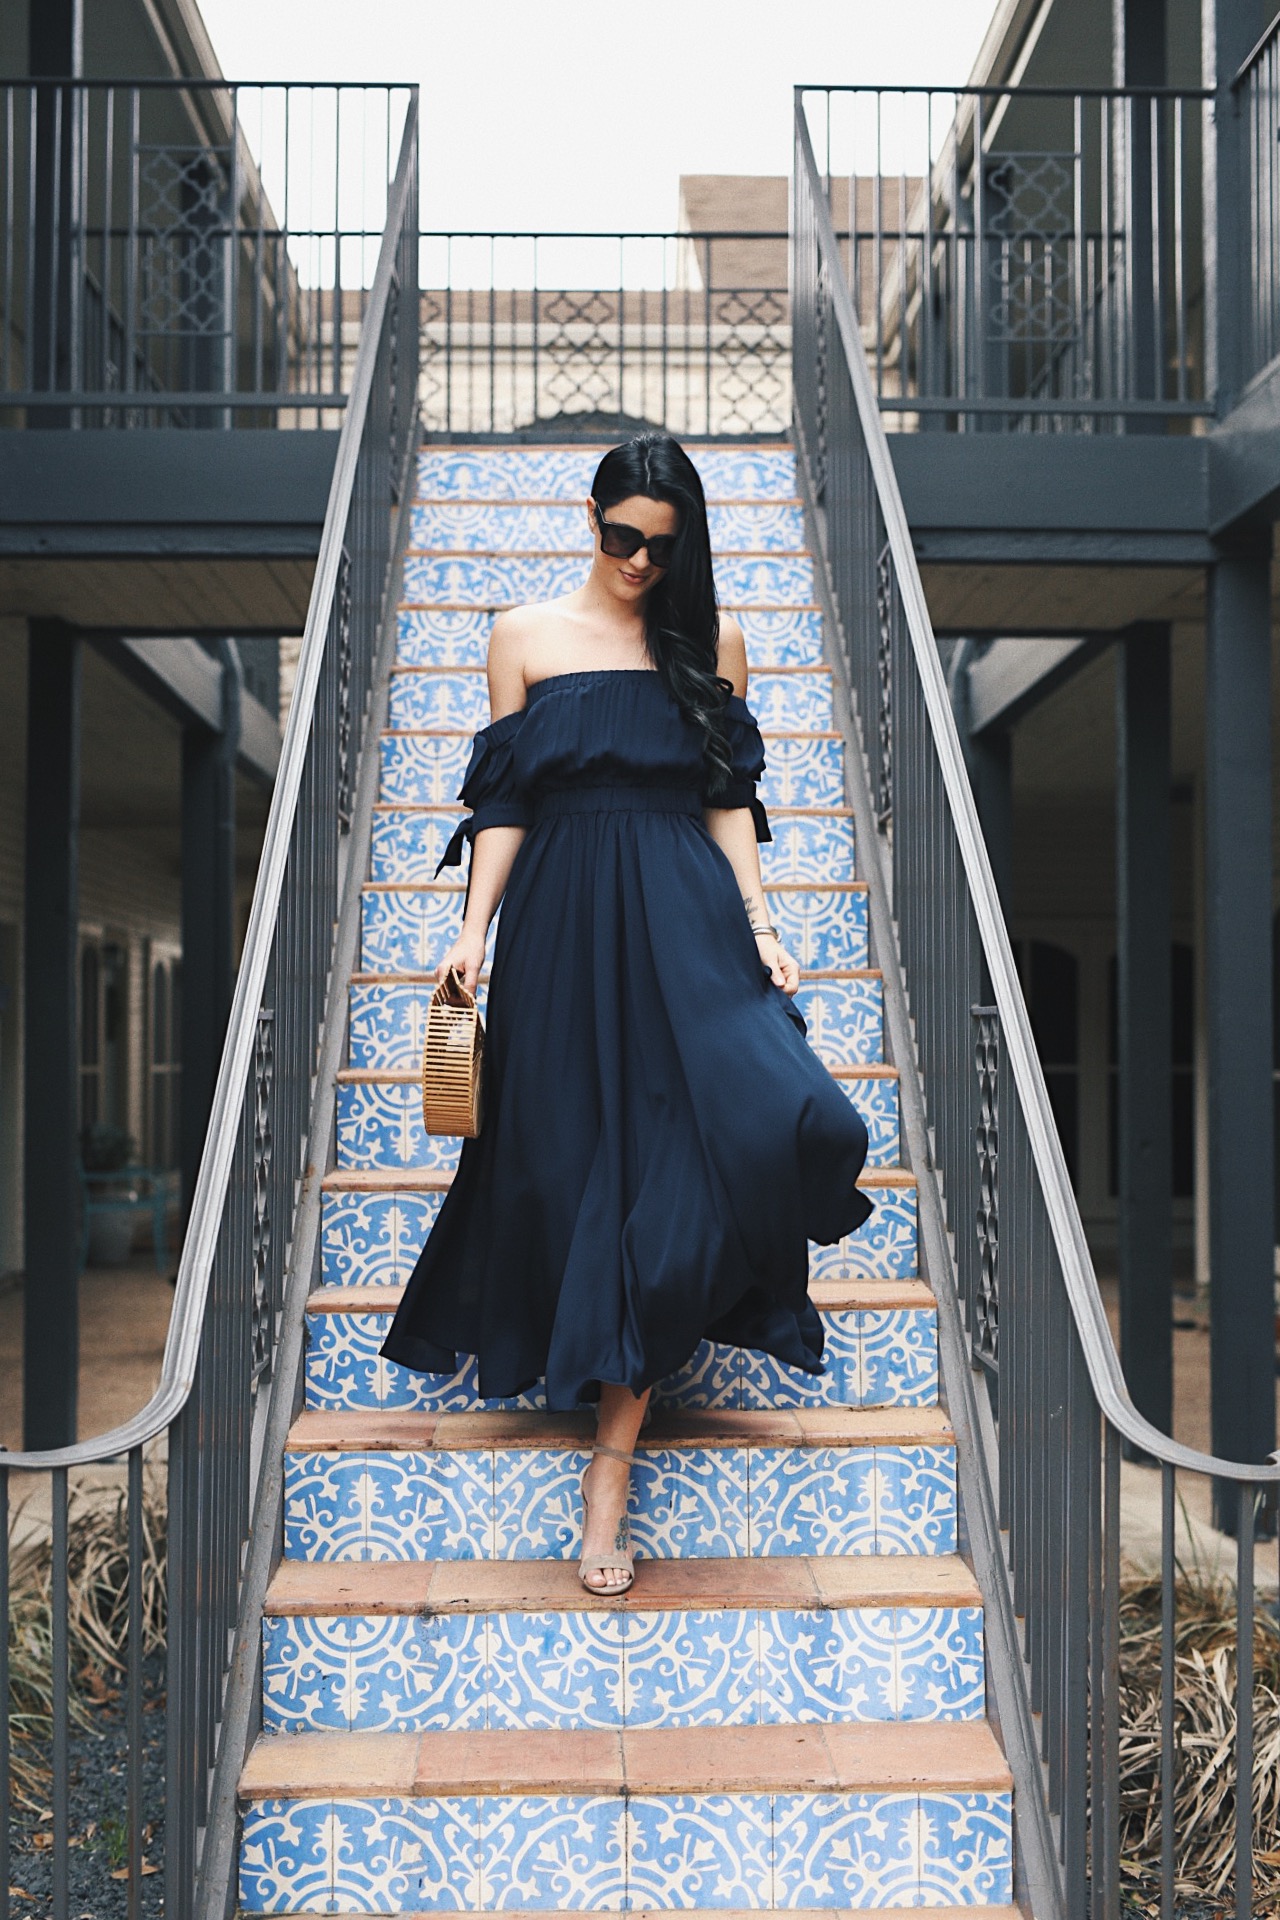 Spring and Summer Dresses featured by top US fashion blog Dressed to Kill; Image of a woman wearing - Milly dress, Cult Gaia handbag, Steve Madden shoes, YSL sunglasses, David Yurman bracelets.